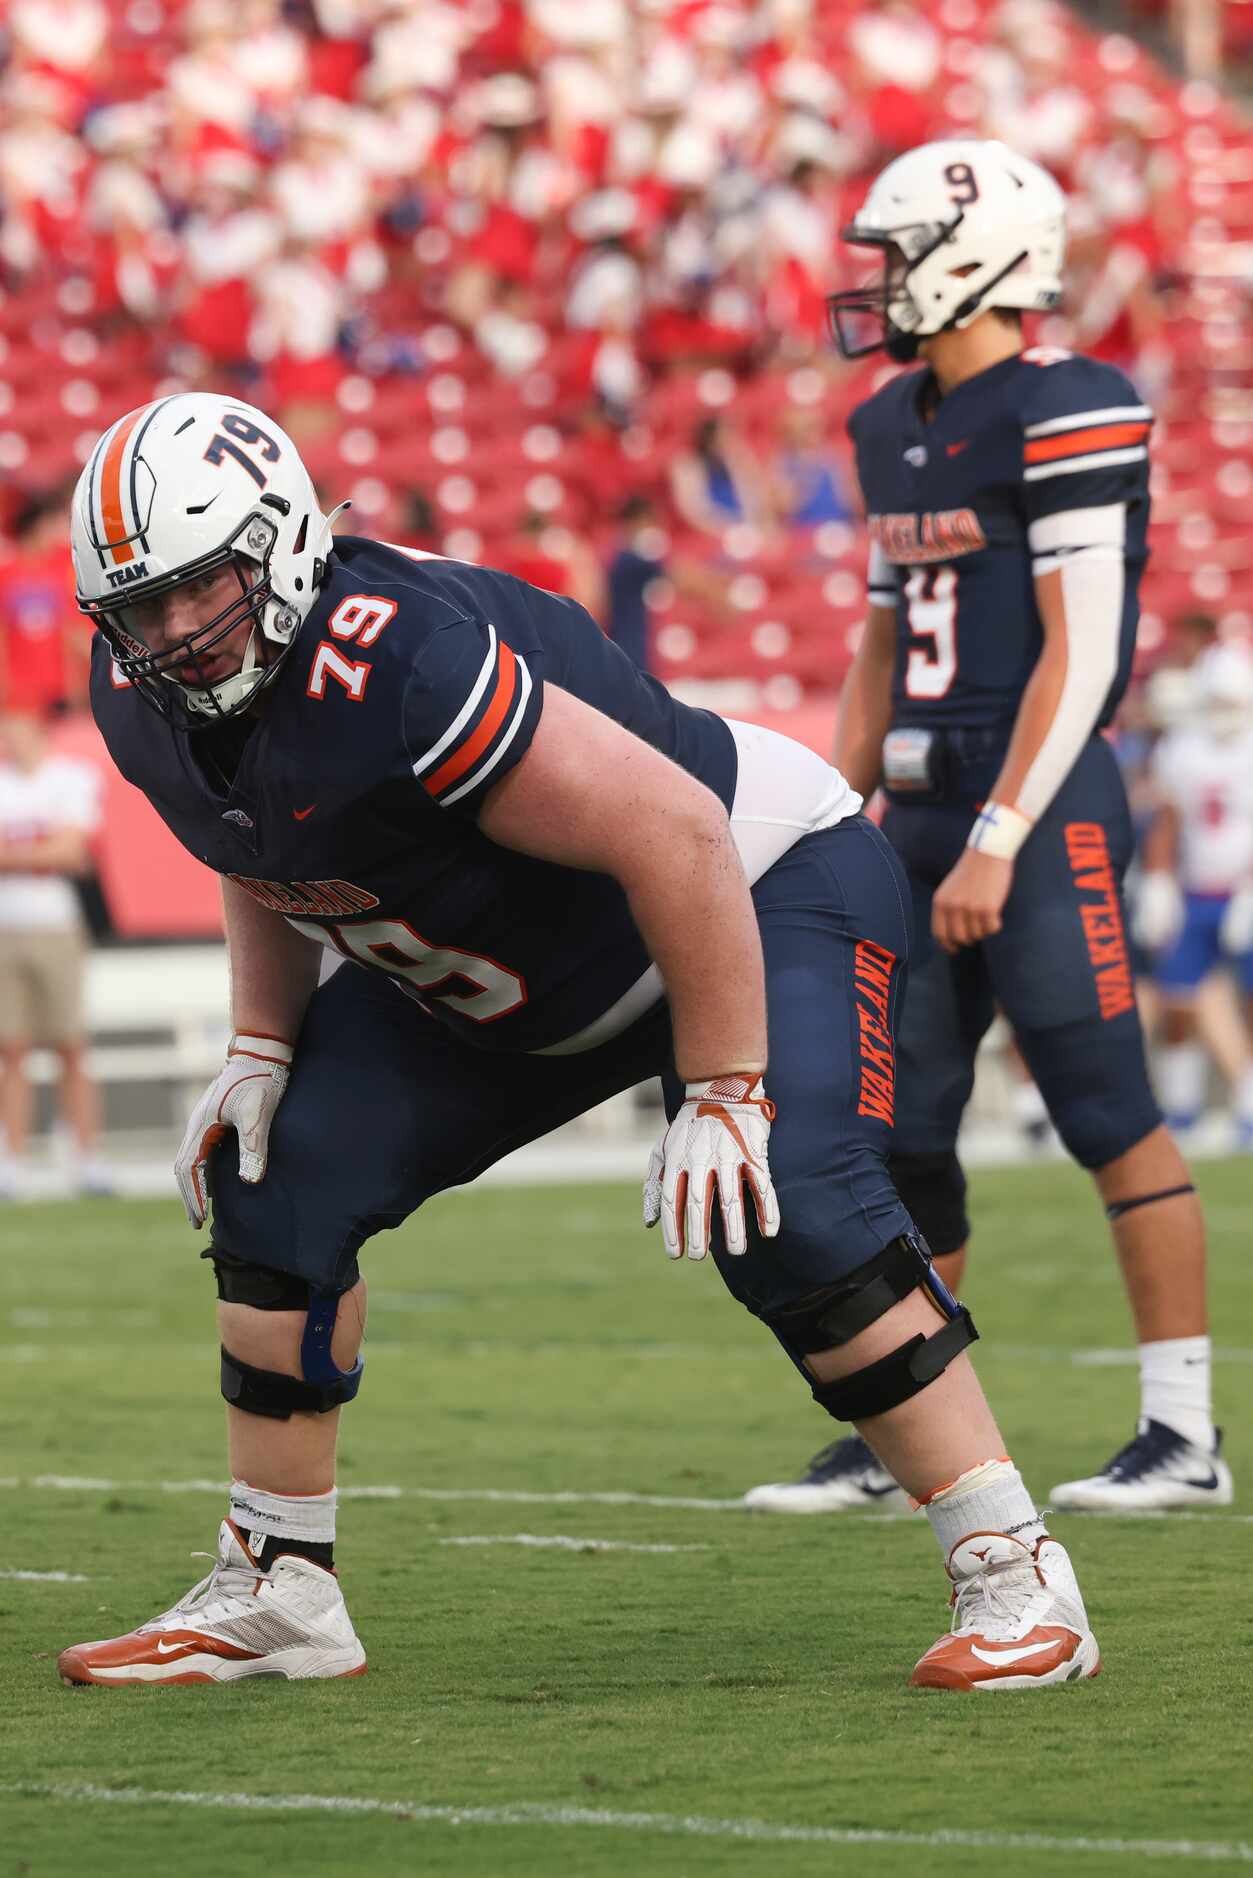 Wakeland High School’s Connor Stroh (79) stands at the line of scrimmage looking to the...